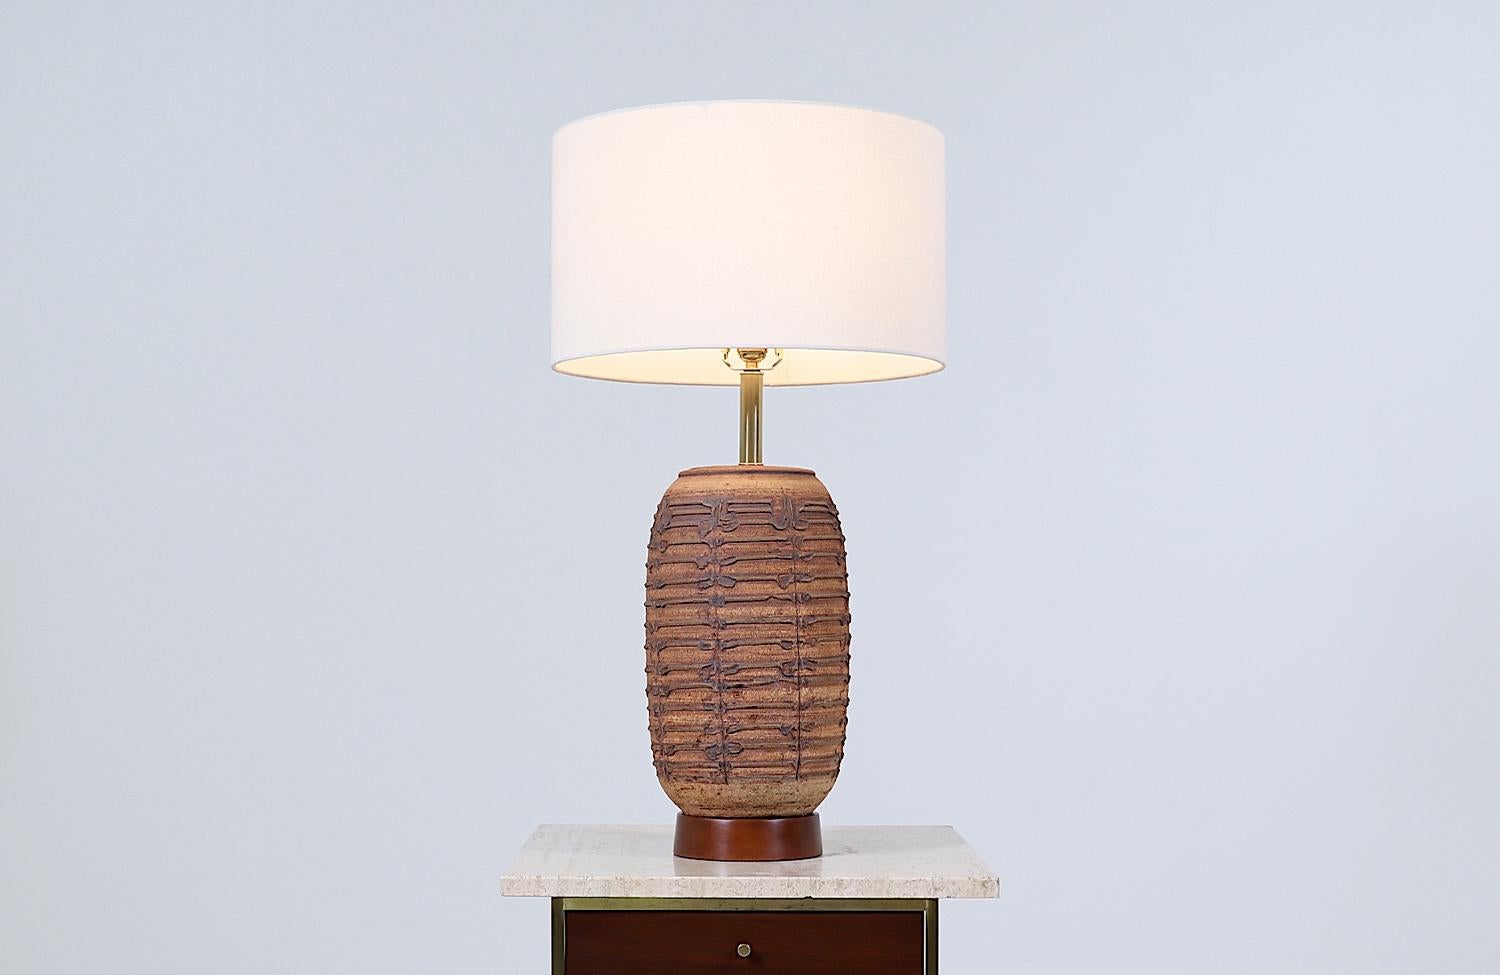 California modern ceramic table lamp by Bob Kinzie.

________________________________________

Transforming a piece of Mid-Century Modern furniture is like bringing history back to life, and we take this journey with passion and precision. With over